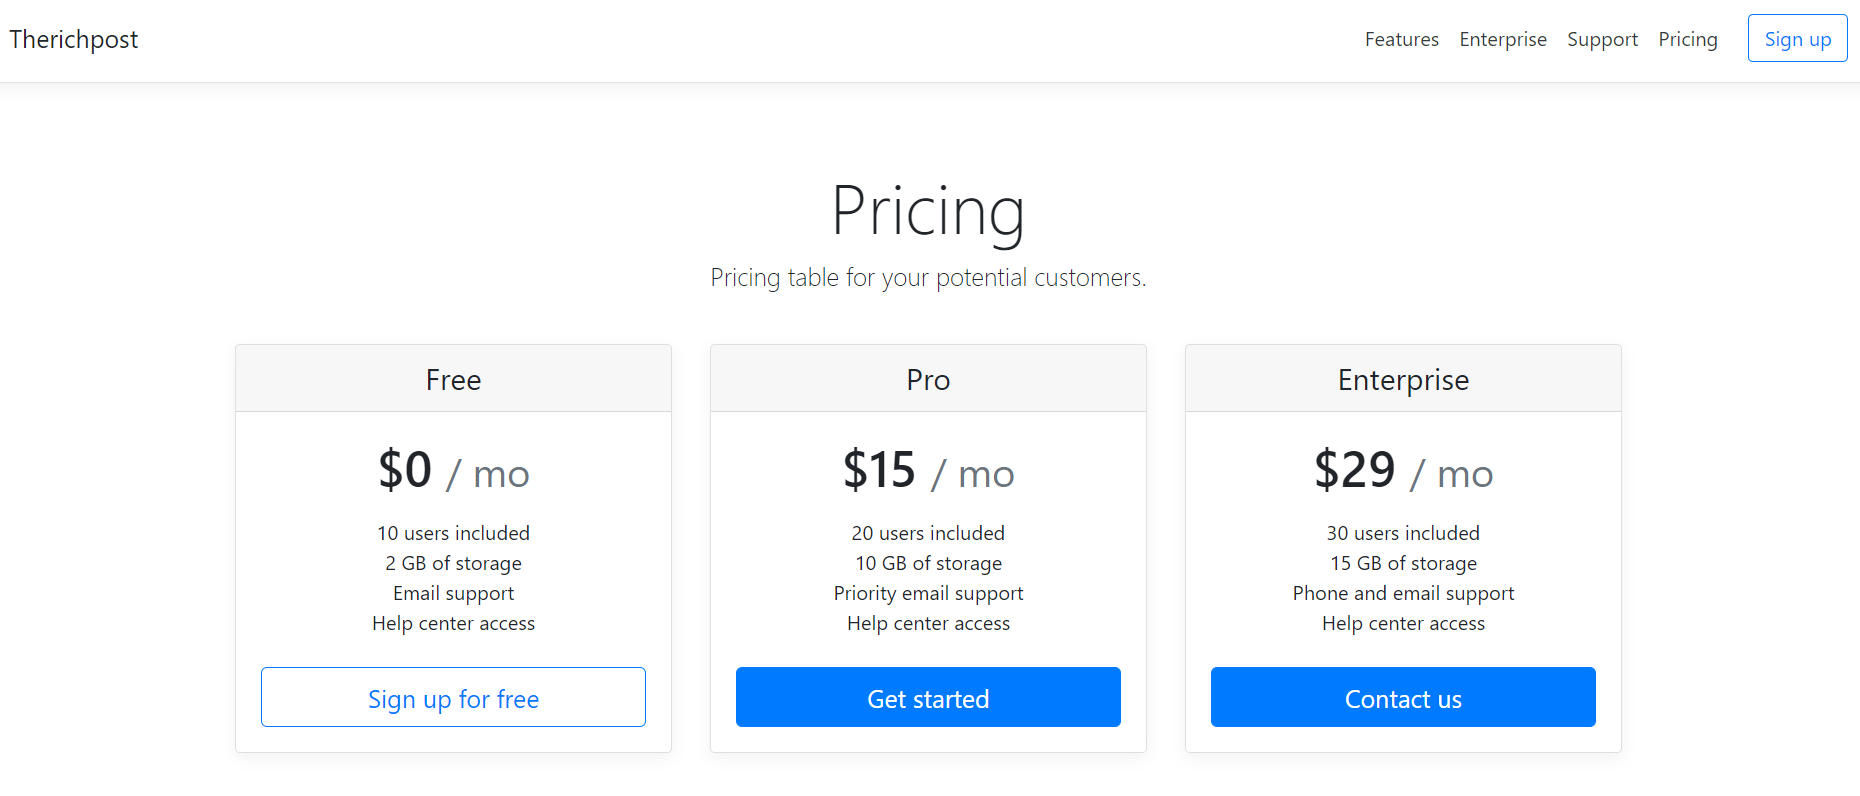 Reactjs Building Ecommerce Site Pricing Page from Scratch